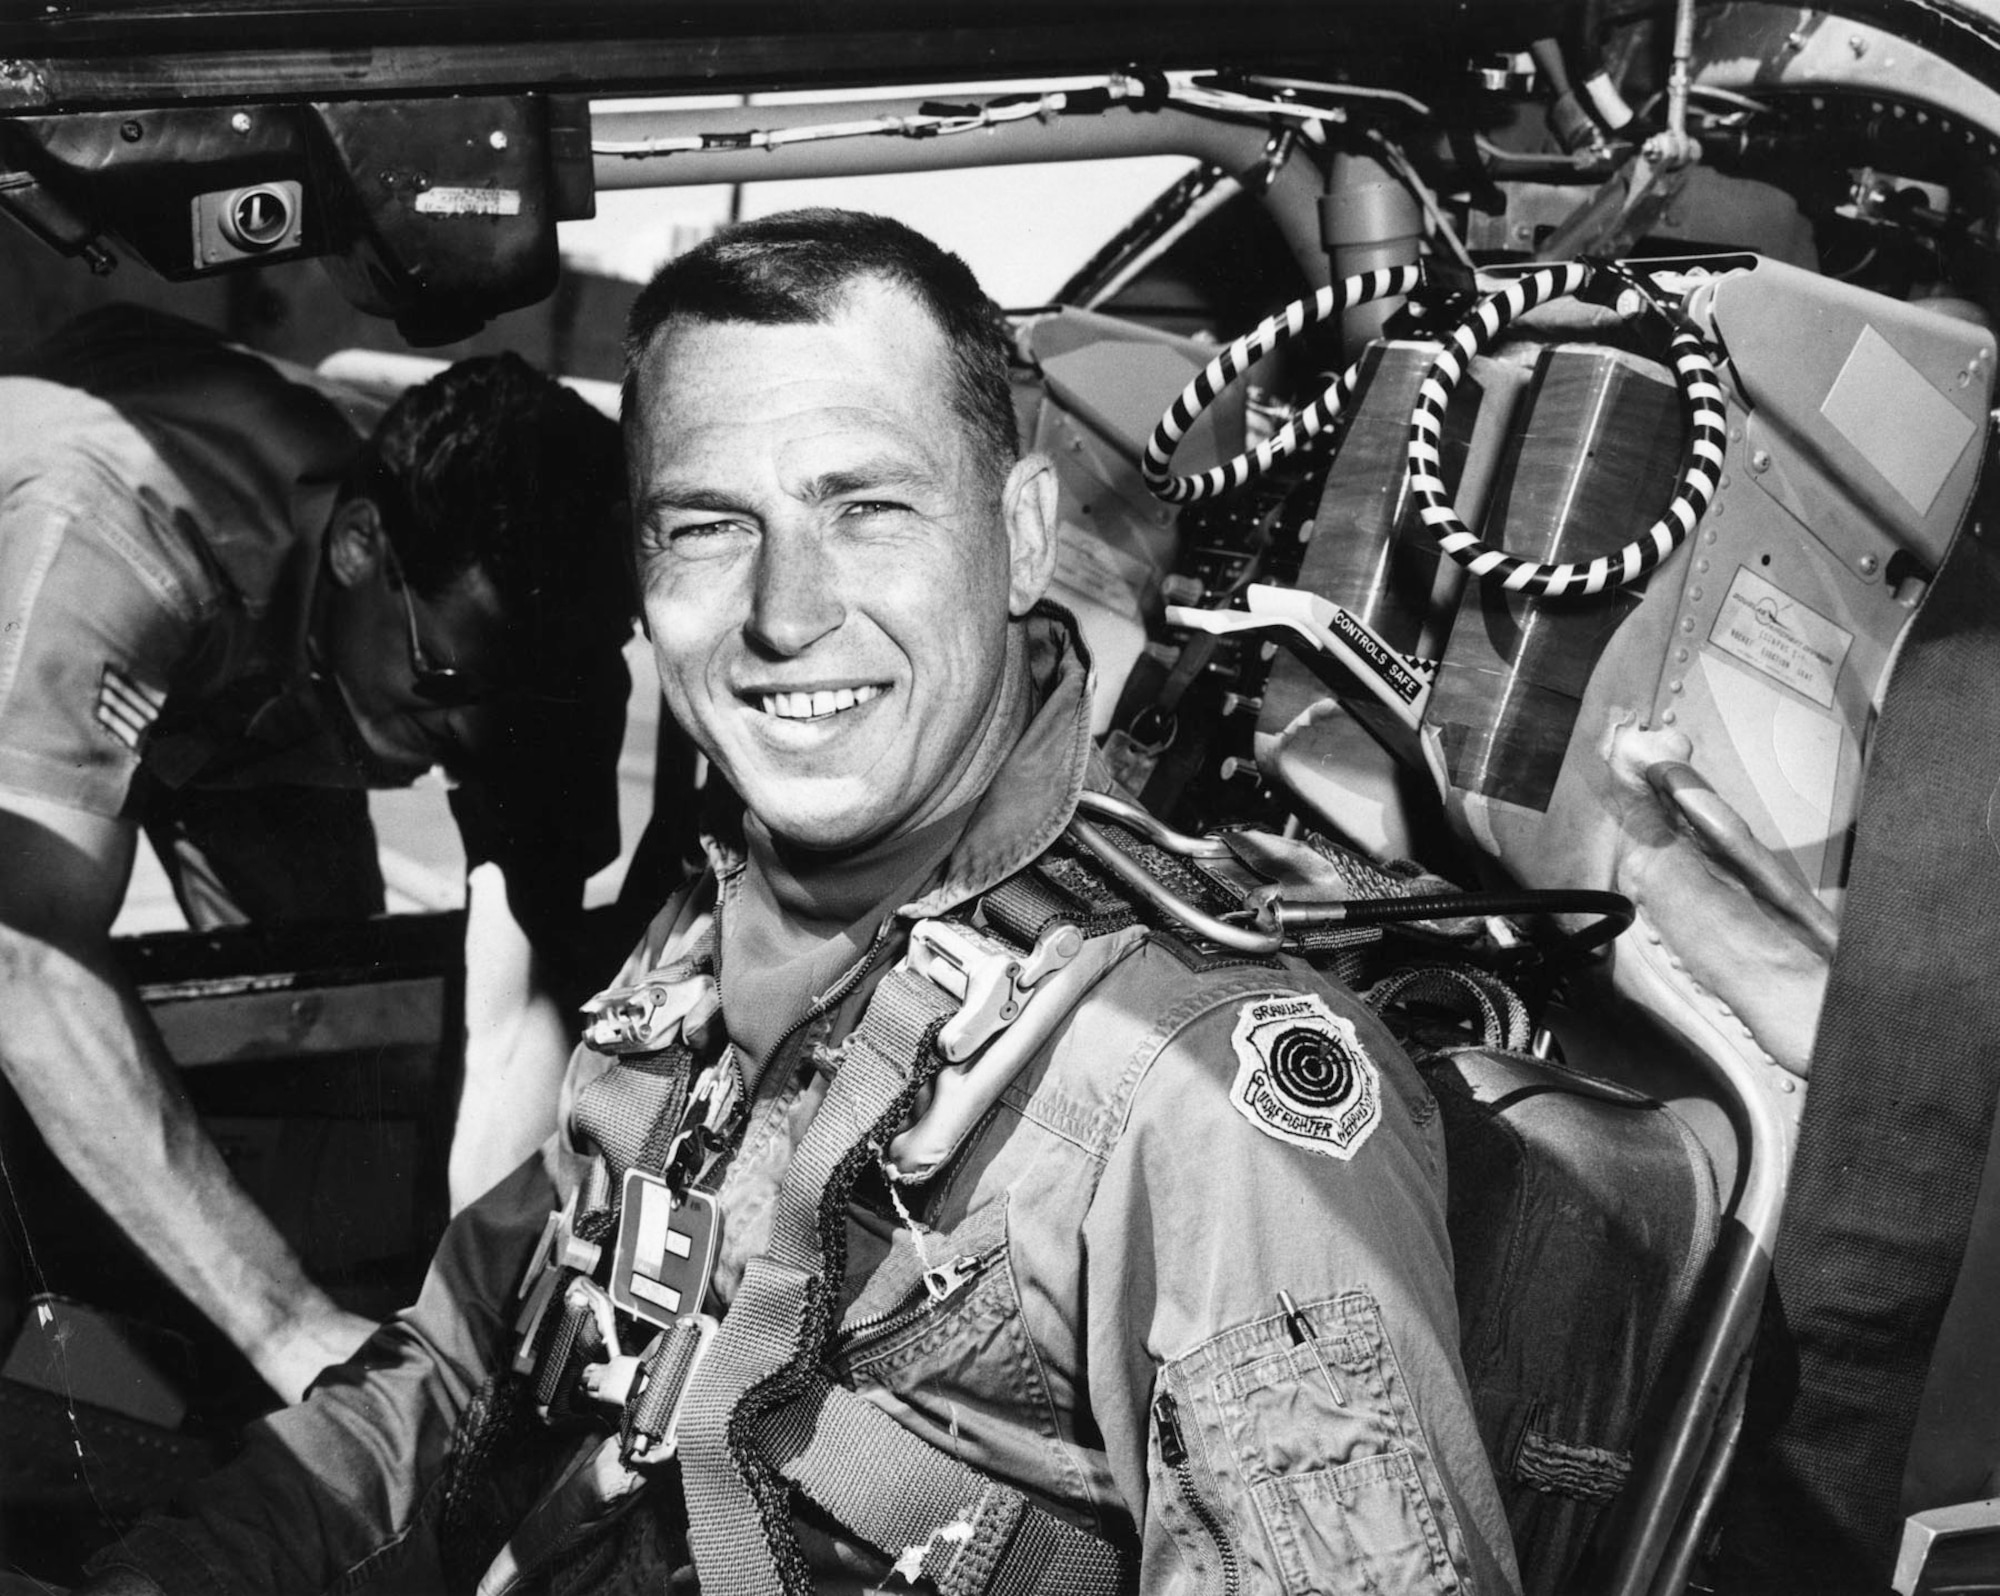 Capt. Fred De Jong in the cockpit of an F-111A. Already a veteran of an F-105 100 mission tour, De Jong was one of a handful of aircrew to combat test the F-111A in 1968. (U.S. Air Force photo)